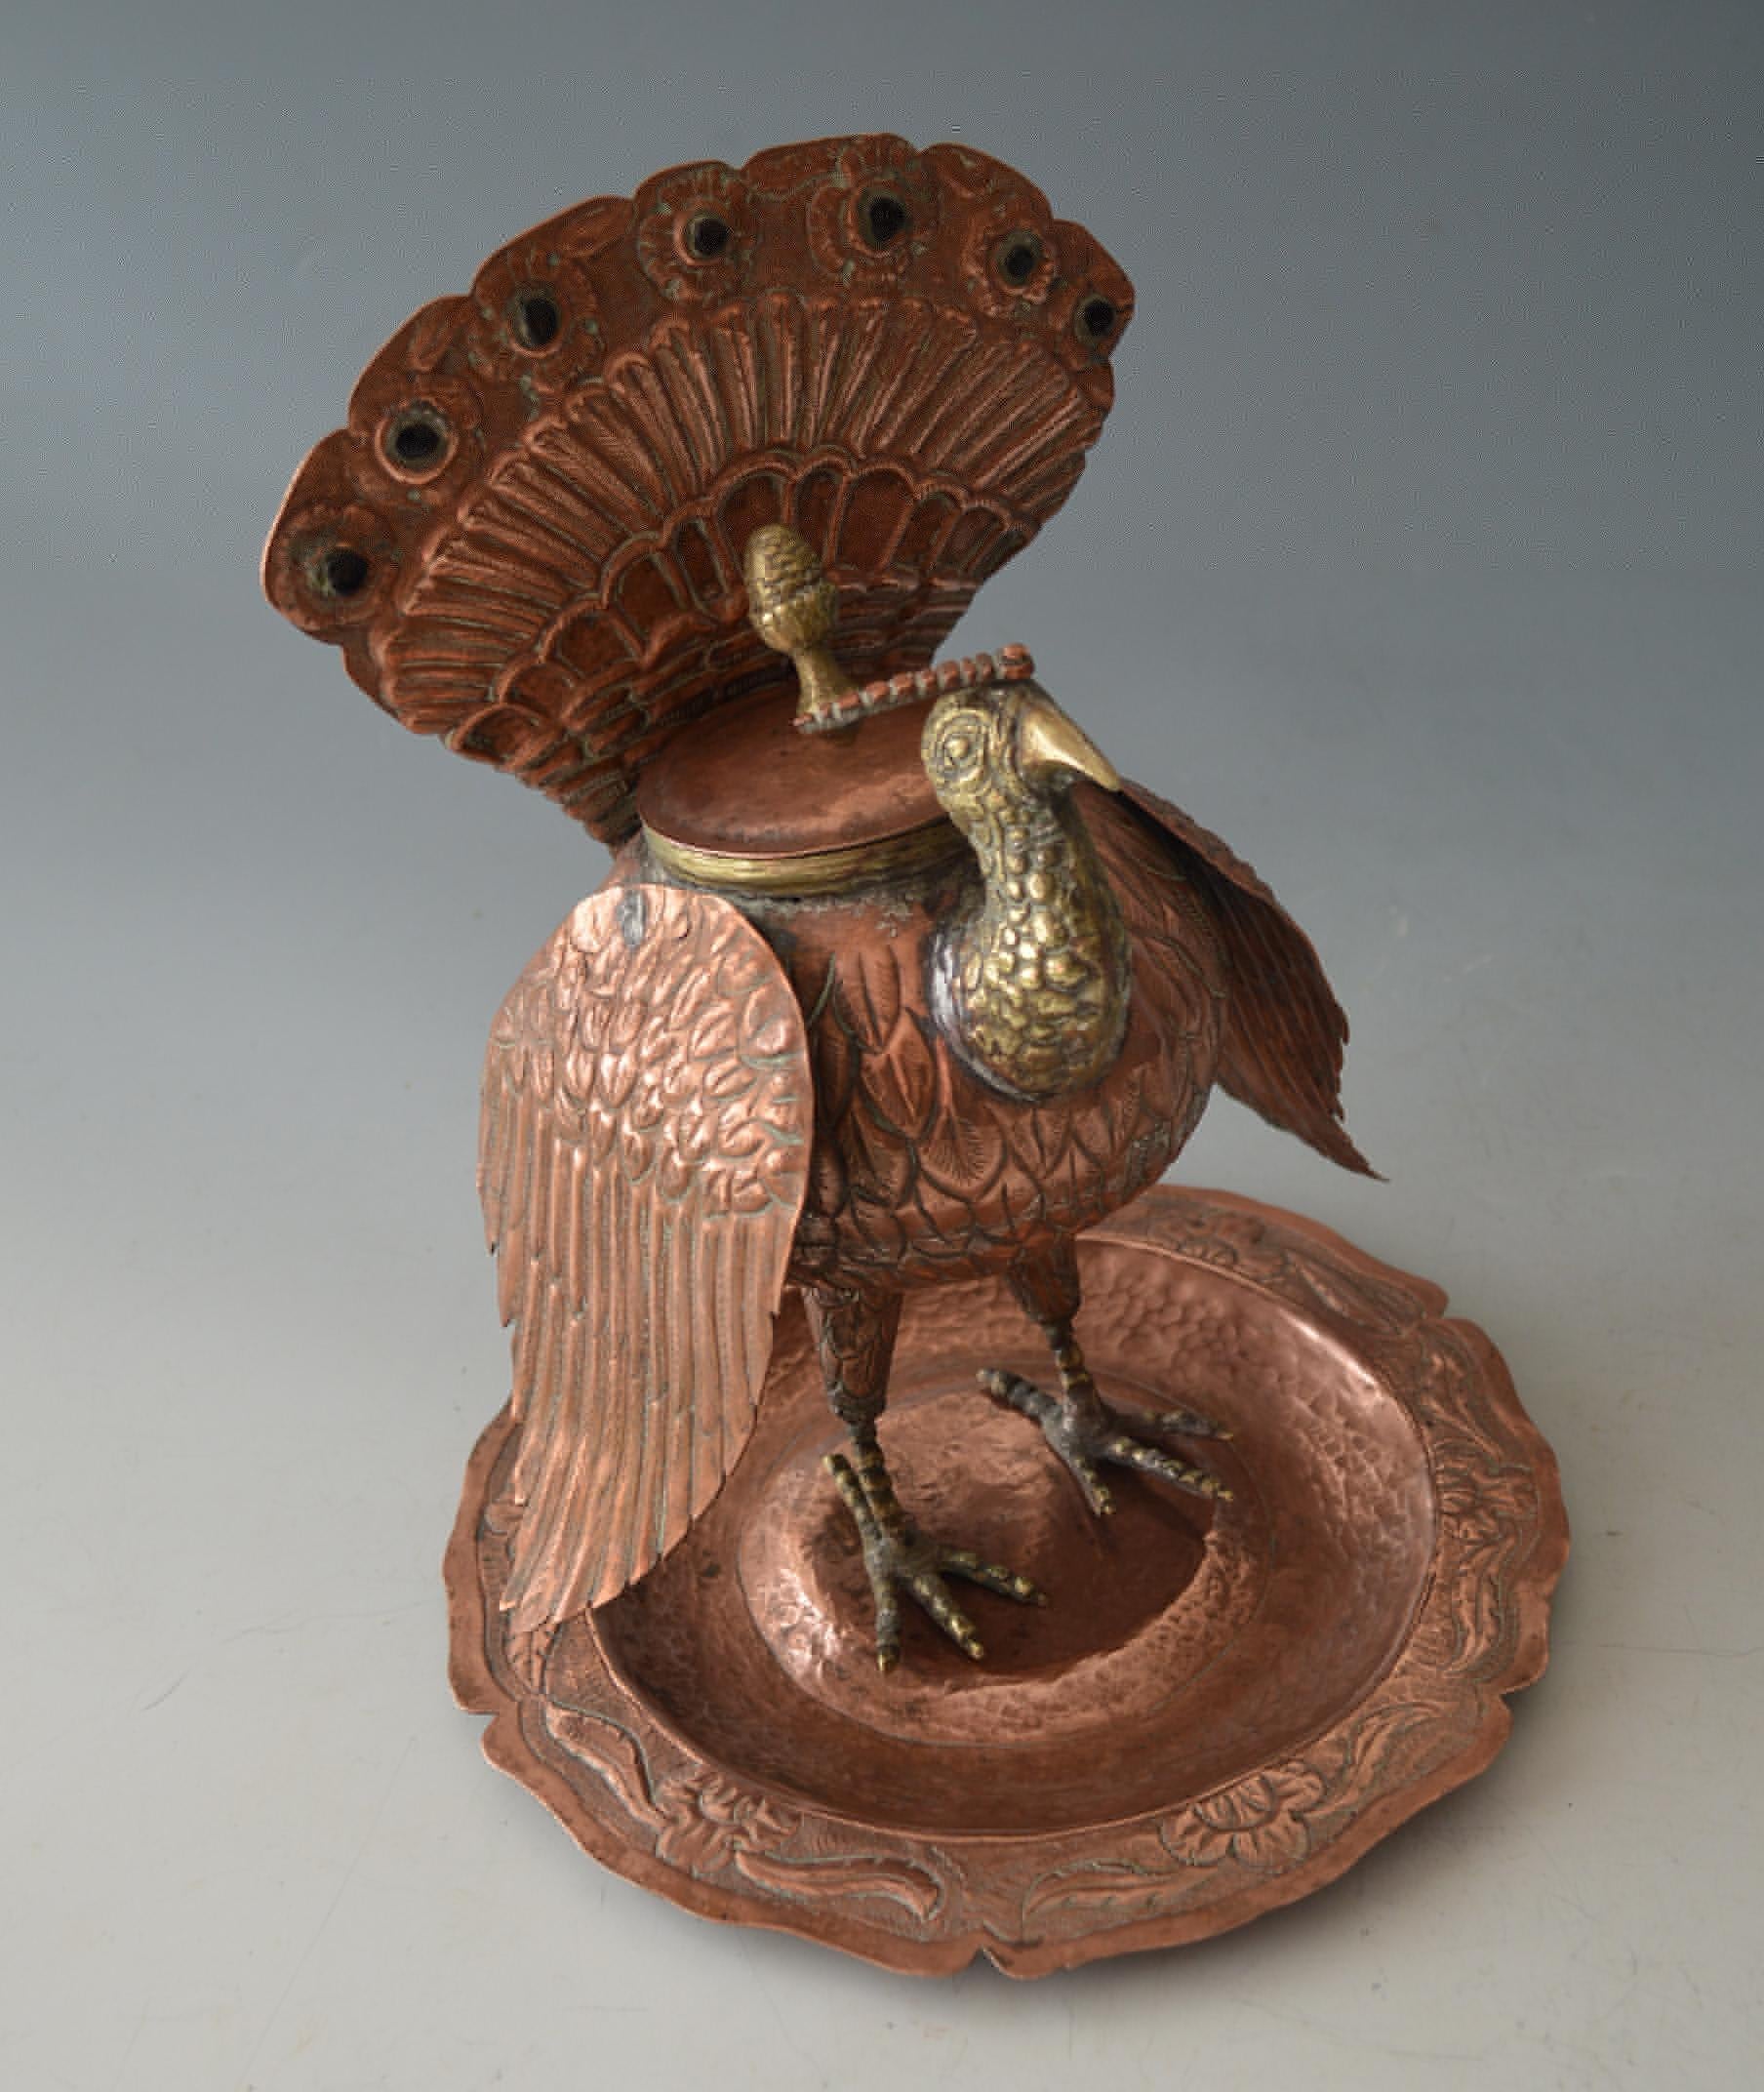 Antique South American Colonial Copper Brass Turkey Censer Latin American
Peru or Bolivia
19th century
H 26 cm 24 m 10 1/2 x 9 1/2 inches approx.
Condition: Good ( one of the nuts that hold it to base missing could be easily replaced ).